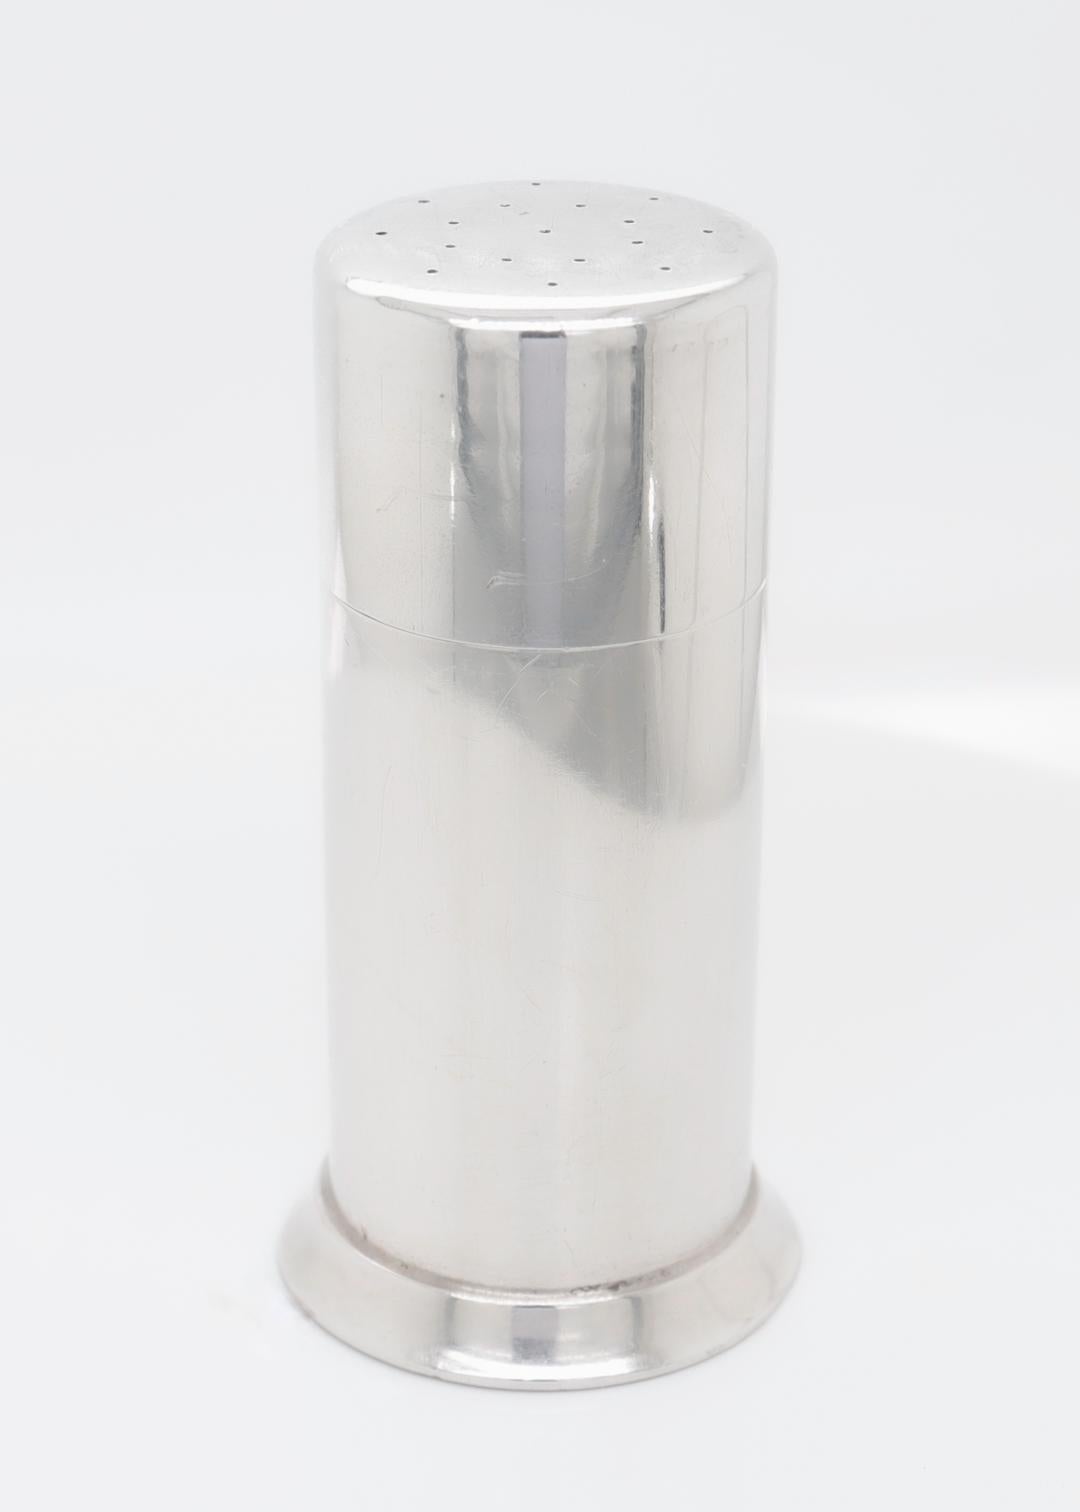 A fine Mid-Century envelope (or stamp) moistener.

In sterling silver.

By Tiffany & Co. 

Model no. 23670.

In bullet or shaker form, the lid with tiny perforations that finely limits water for moistening the envelope.

Produced between 1956 - 1965